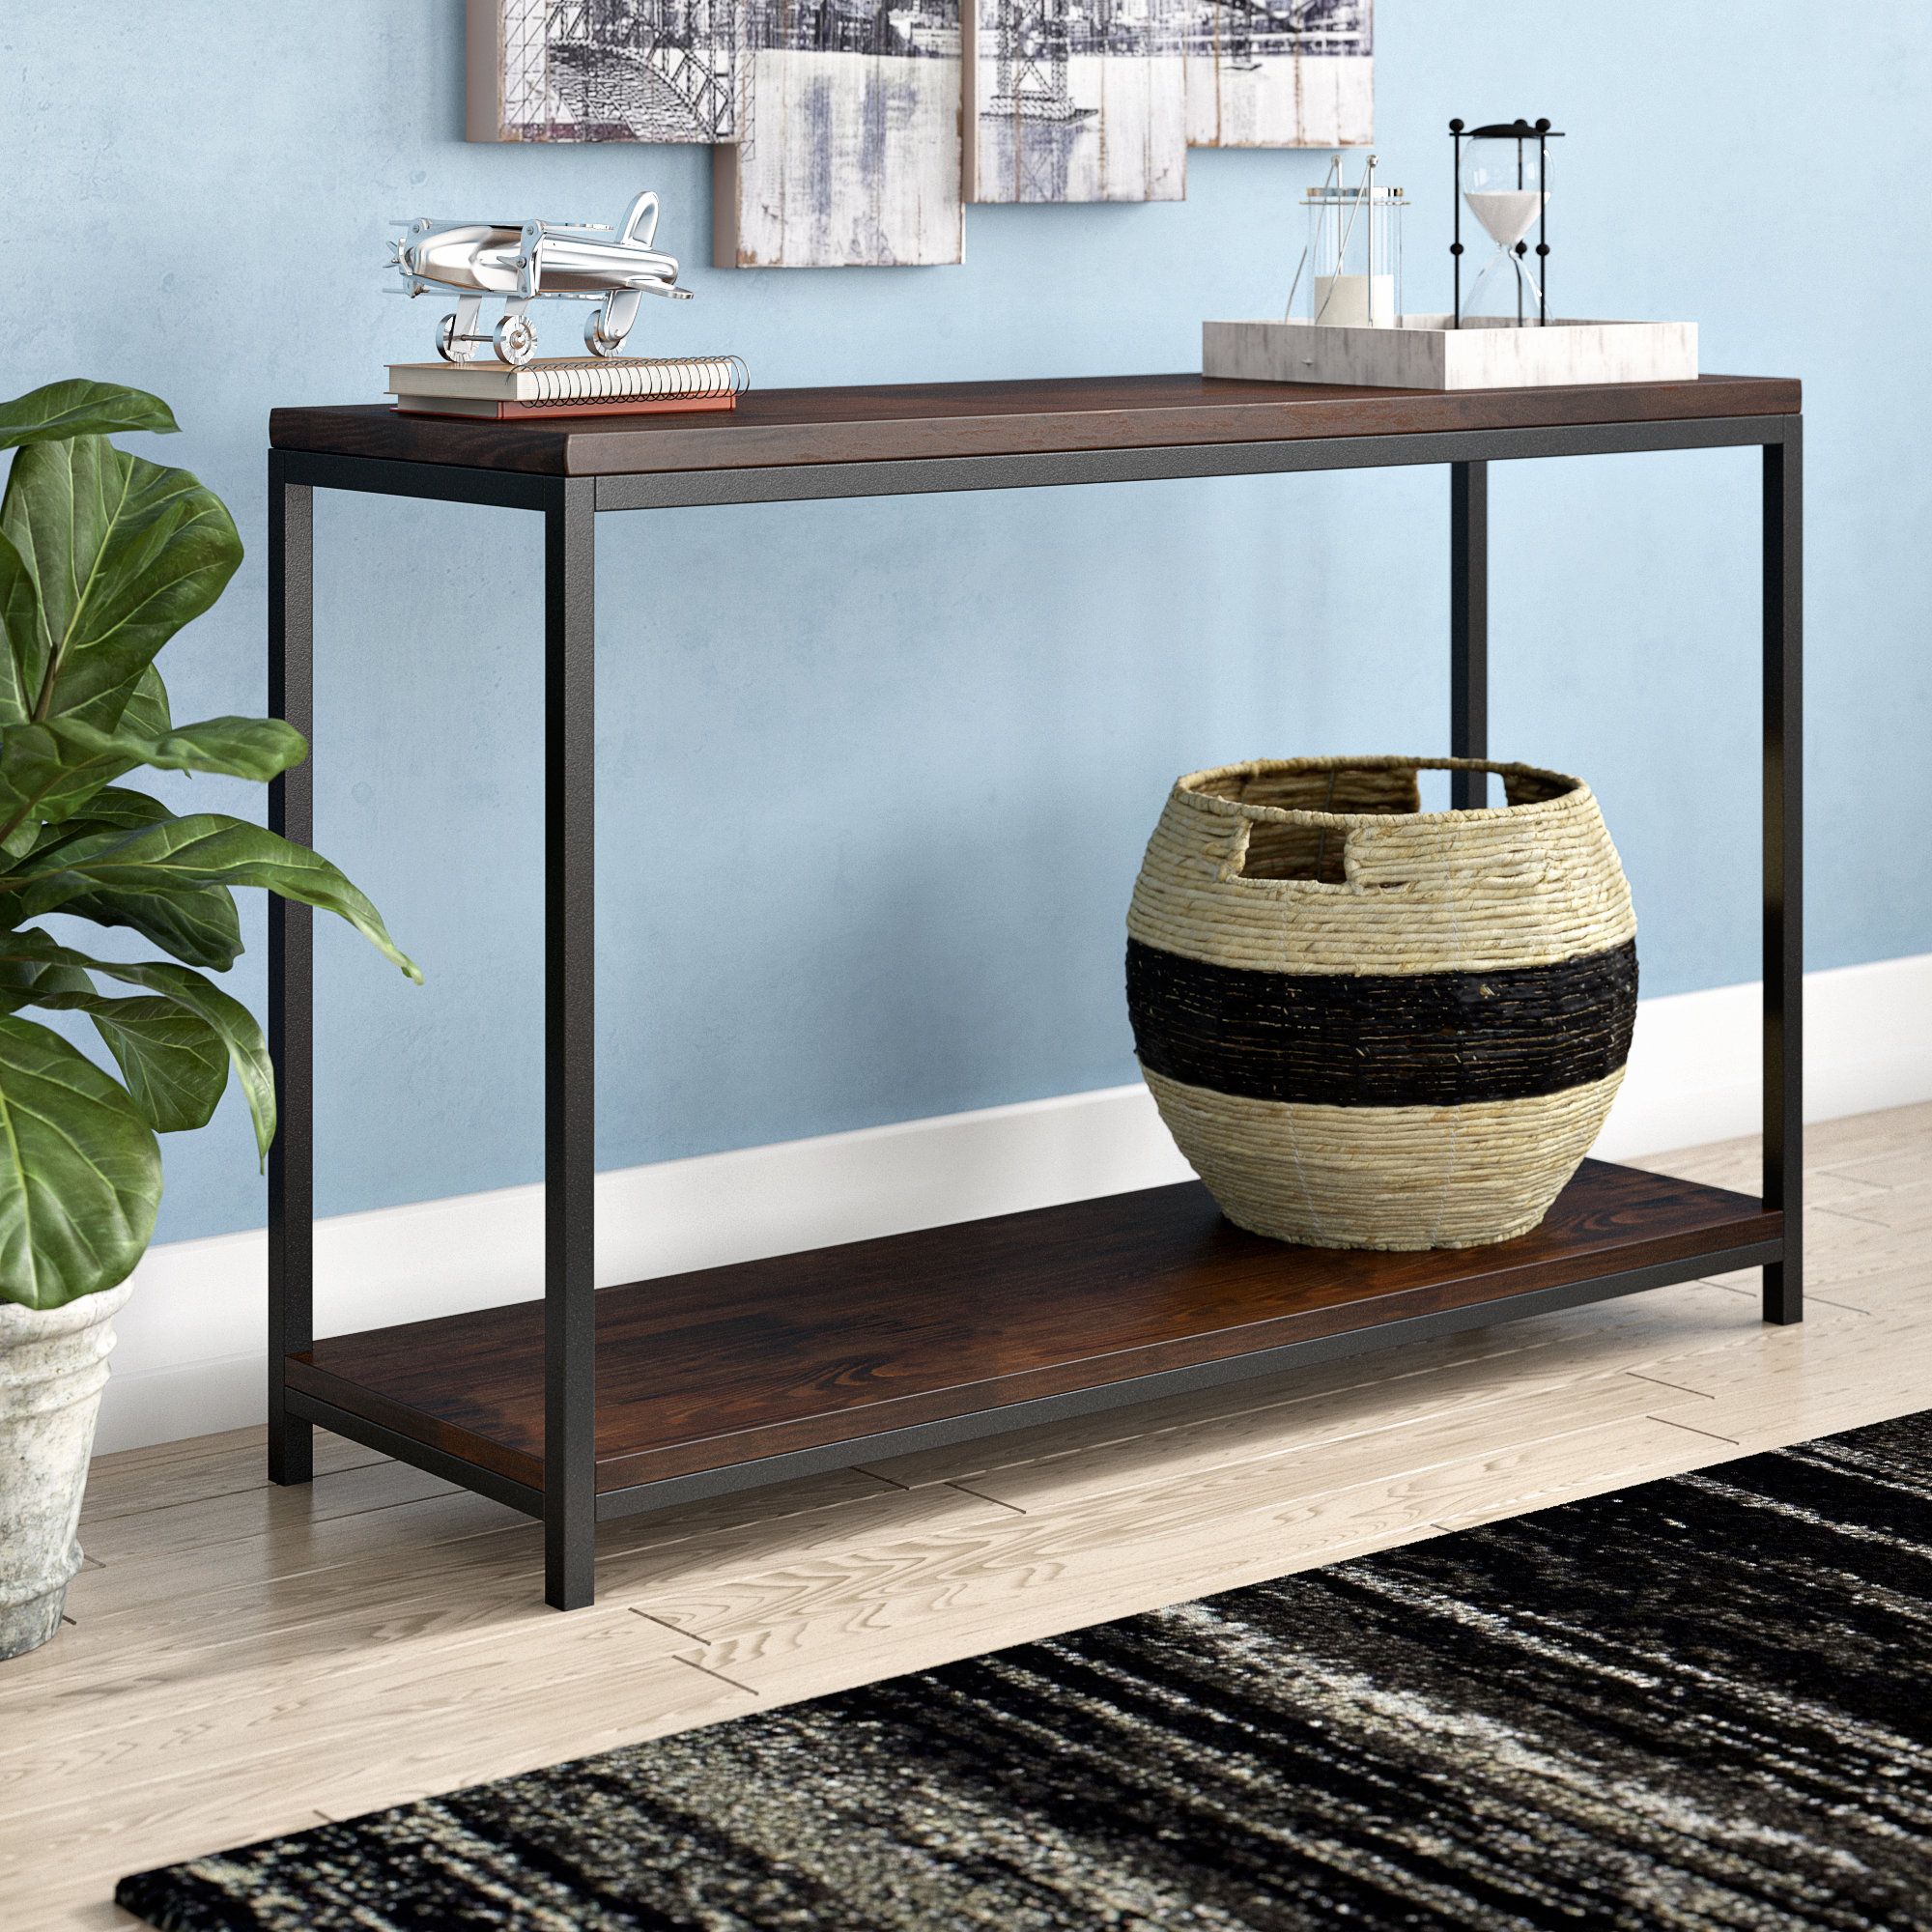 Wayfair Intended For Most Recent Parsons Walnut Top & Dark Steel Base 48x16 Console Tables (View 15 of 20)